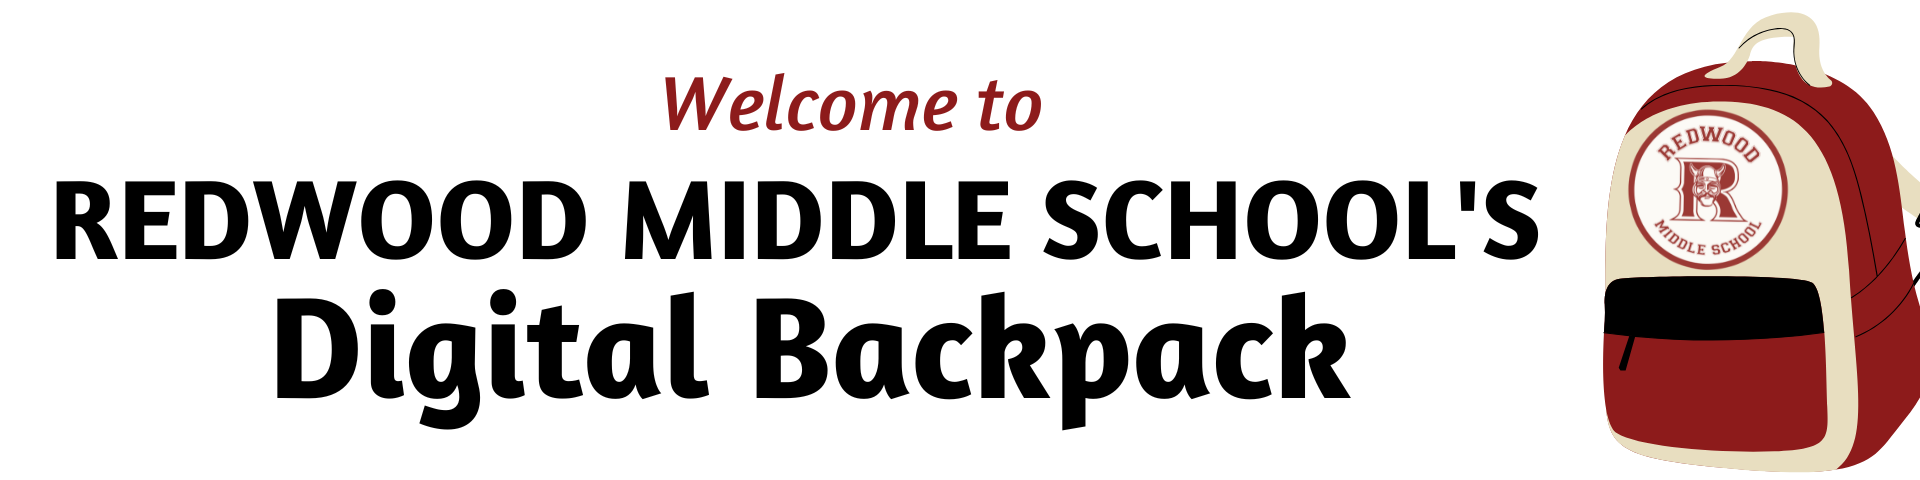 Welcome to Redwood Middle School's Digital Backpack